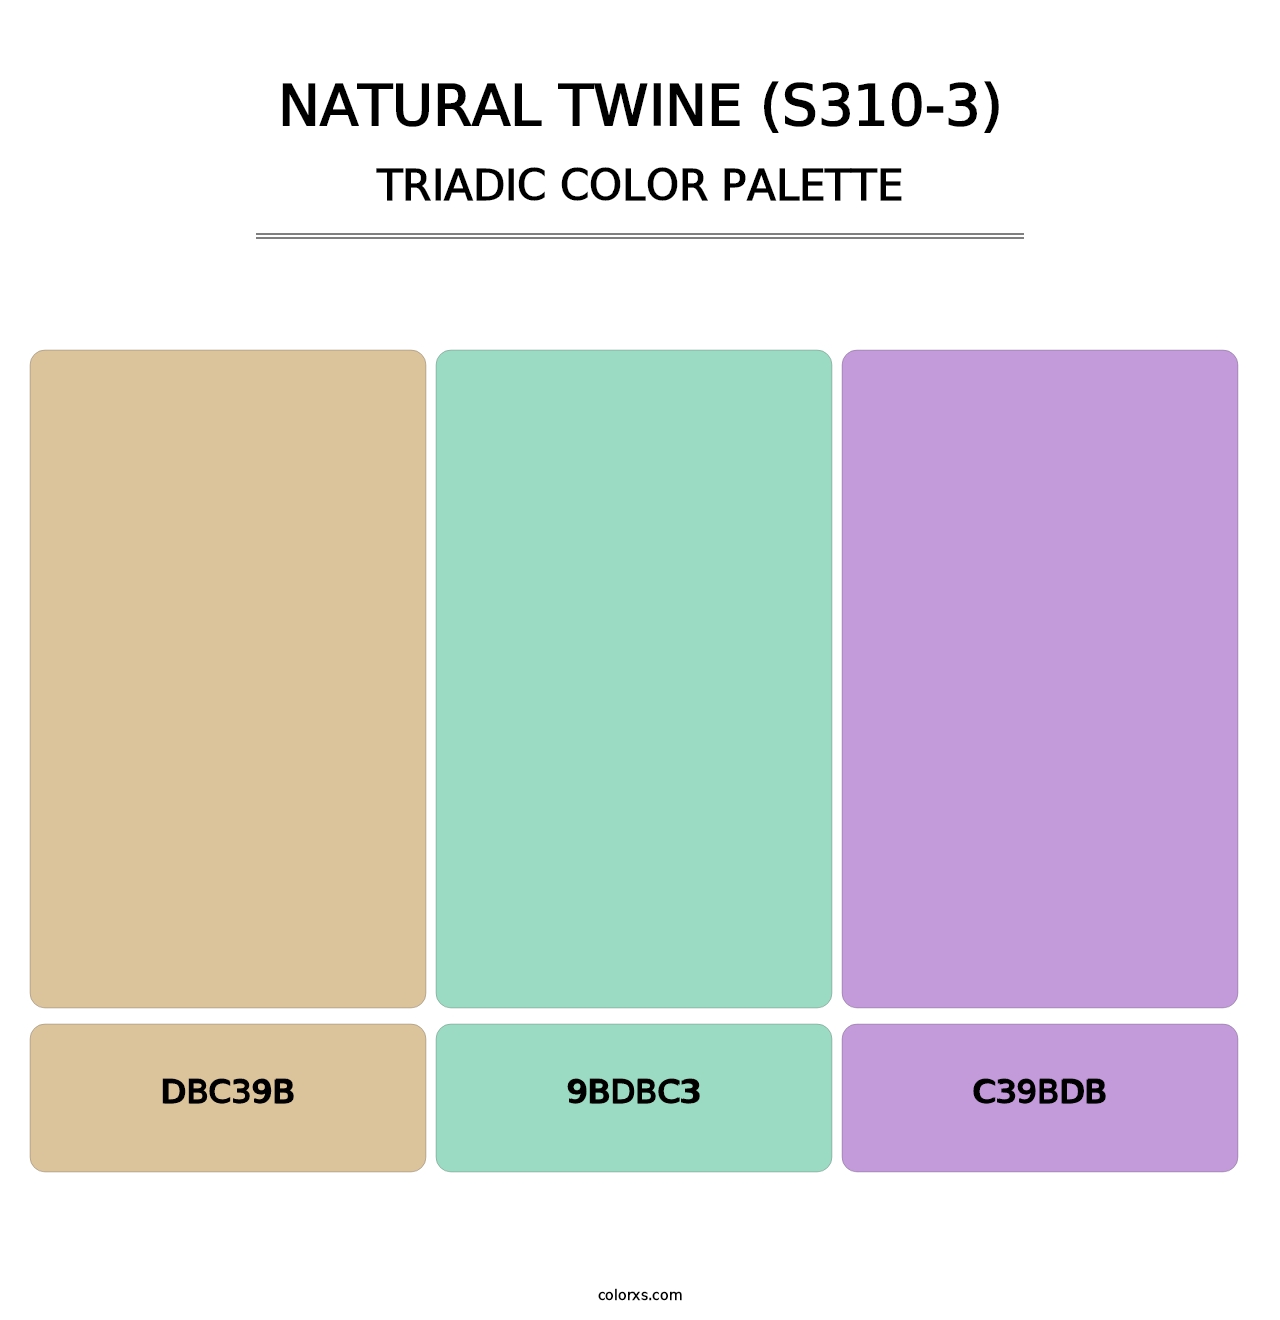 Natural Twine (S310-3) - Triadic Color Palette